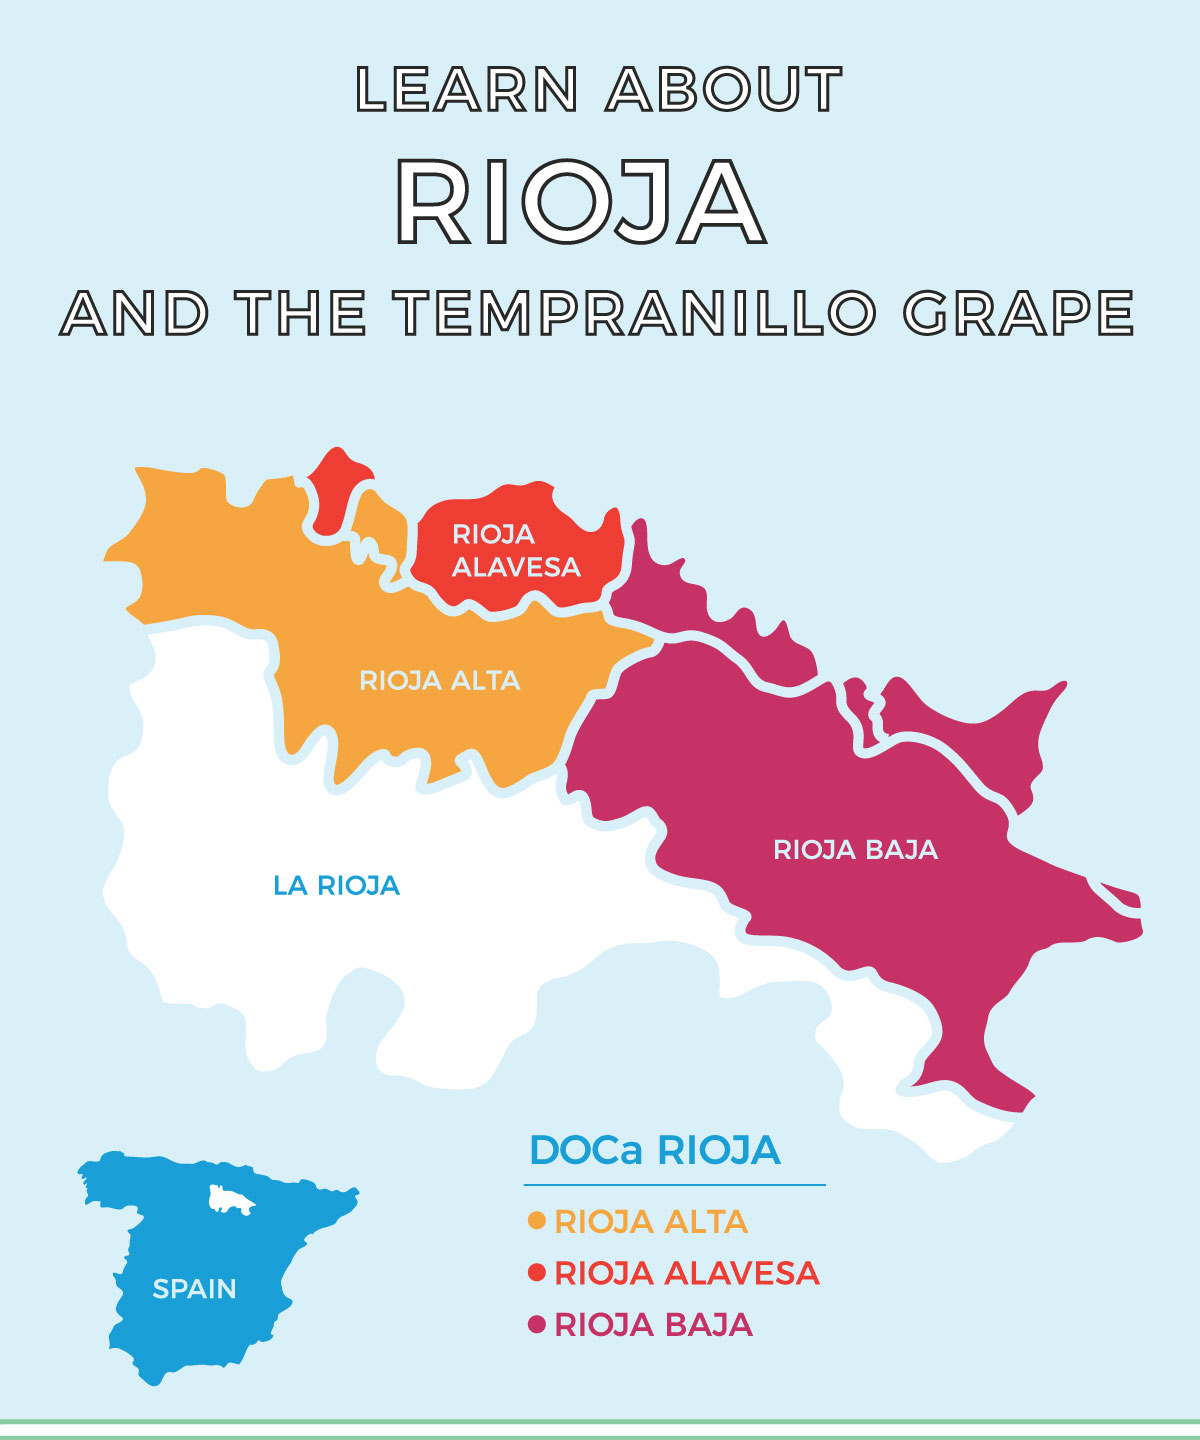 The Complete Guide To Rioja And The Tempranillo Grape [Infographic]